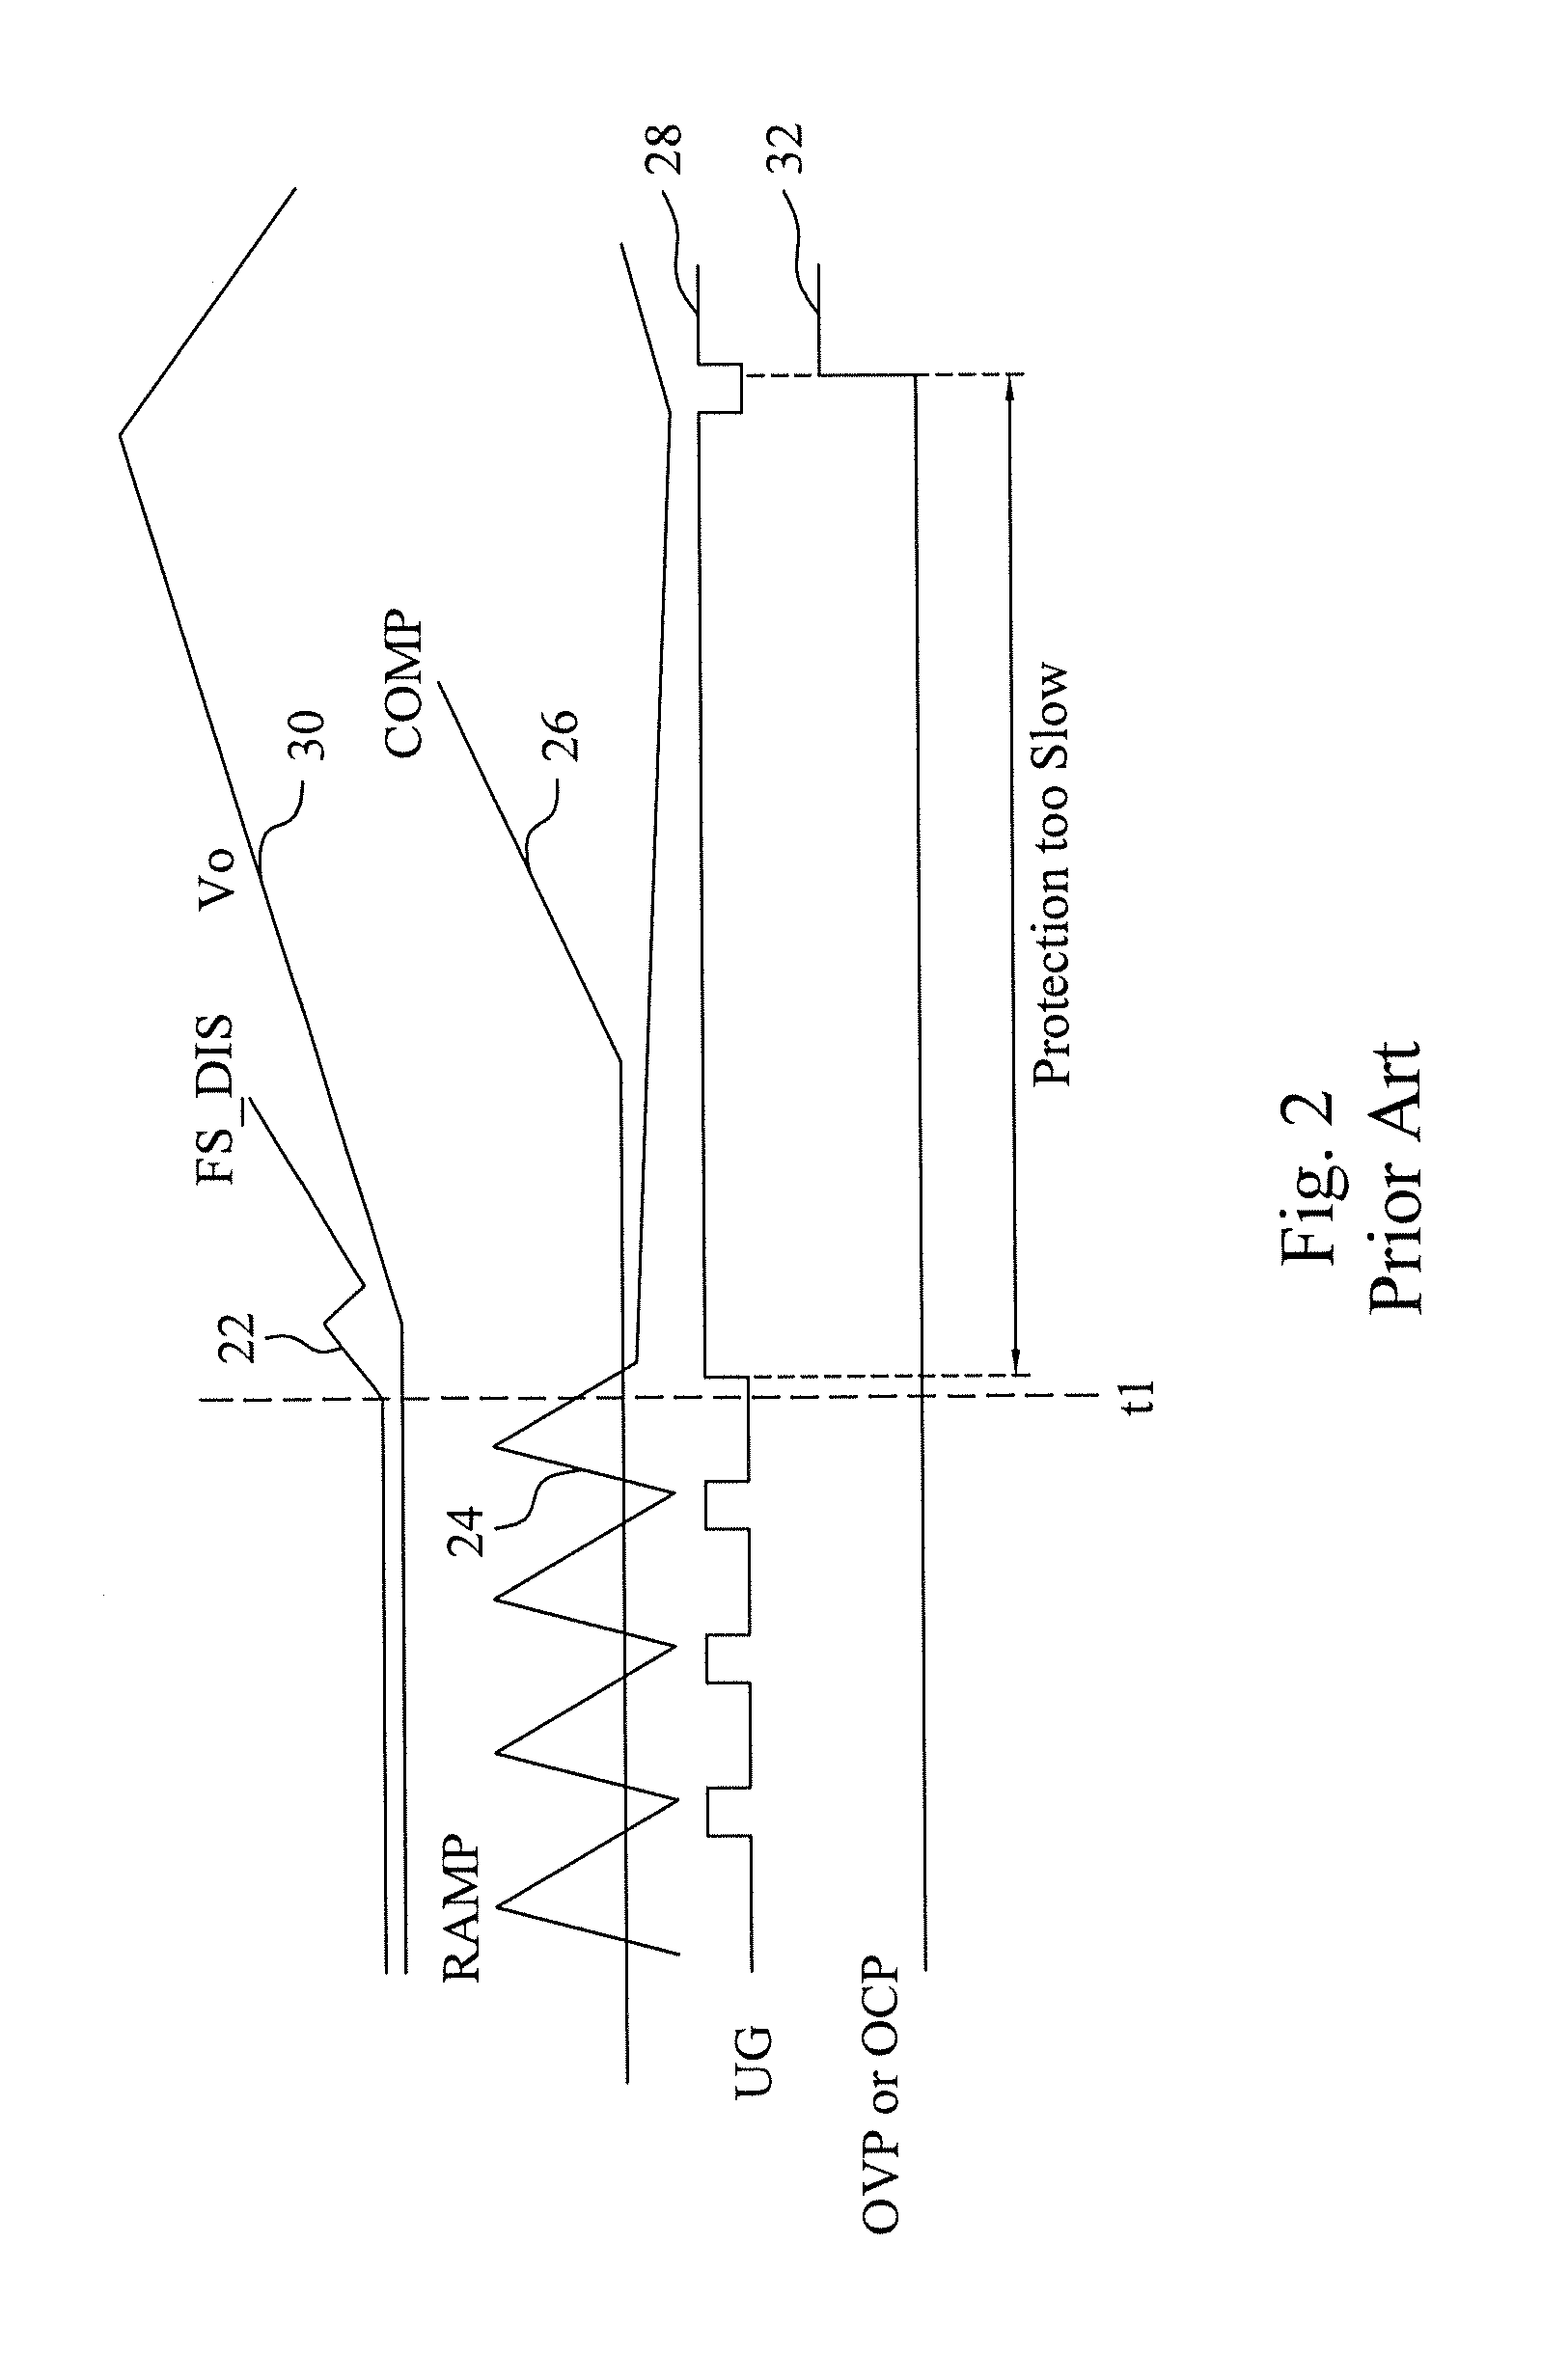 Protection to avoid abnormal operation caused by a shorted parameter setting pin of an integrated circuit